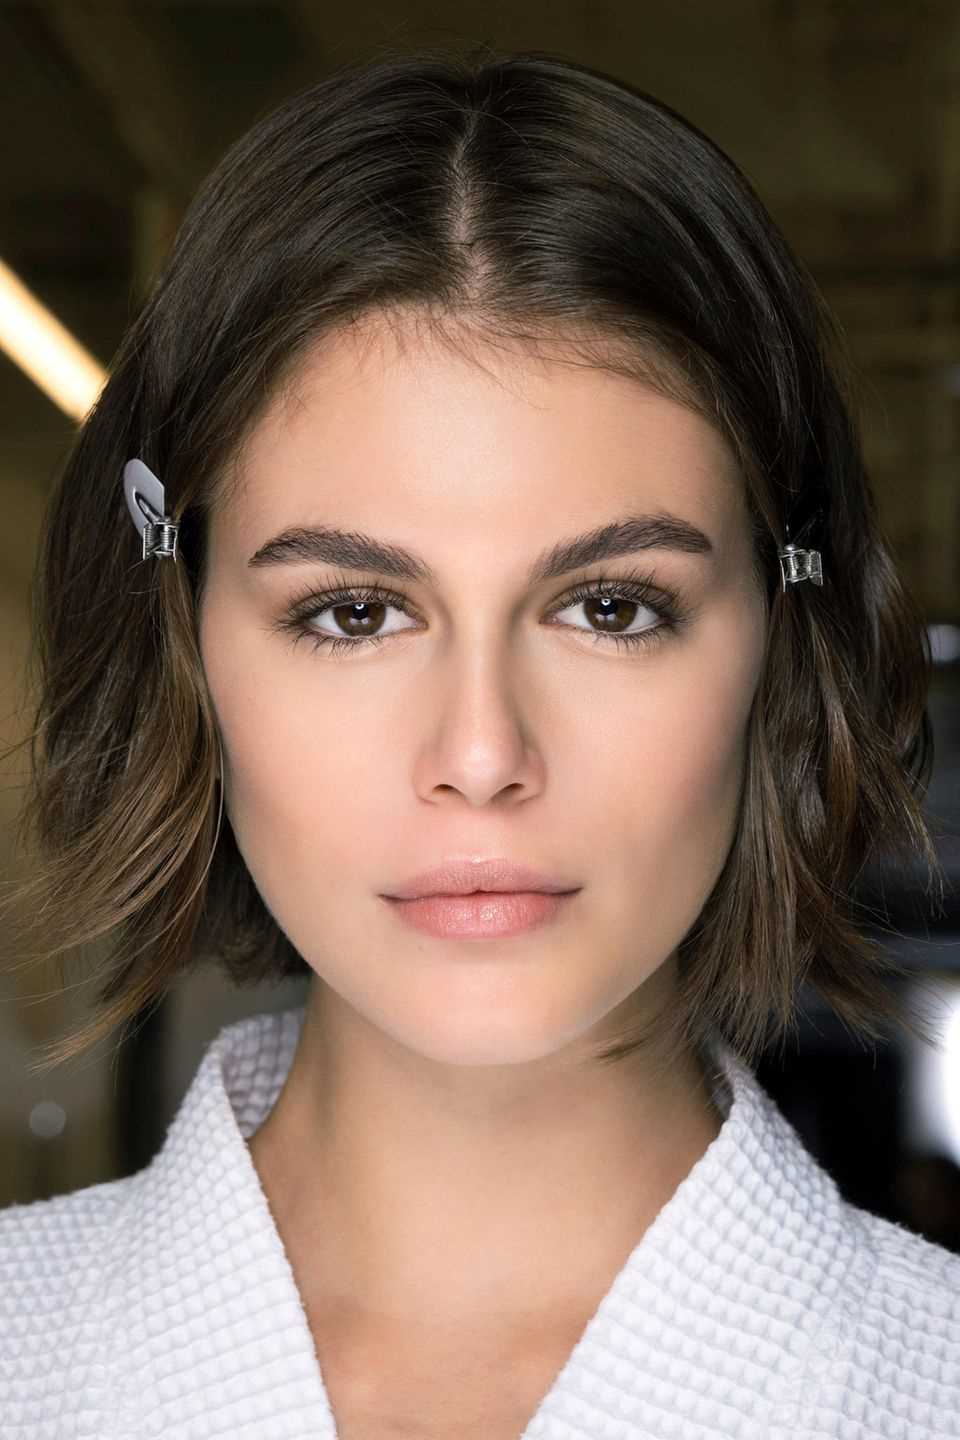 Kaia Gerber also knows how to keep her eyelashes long. 